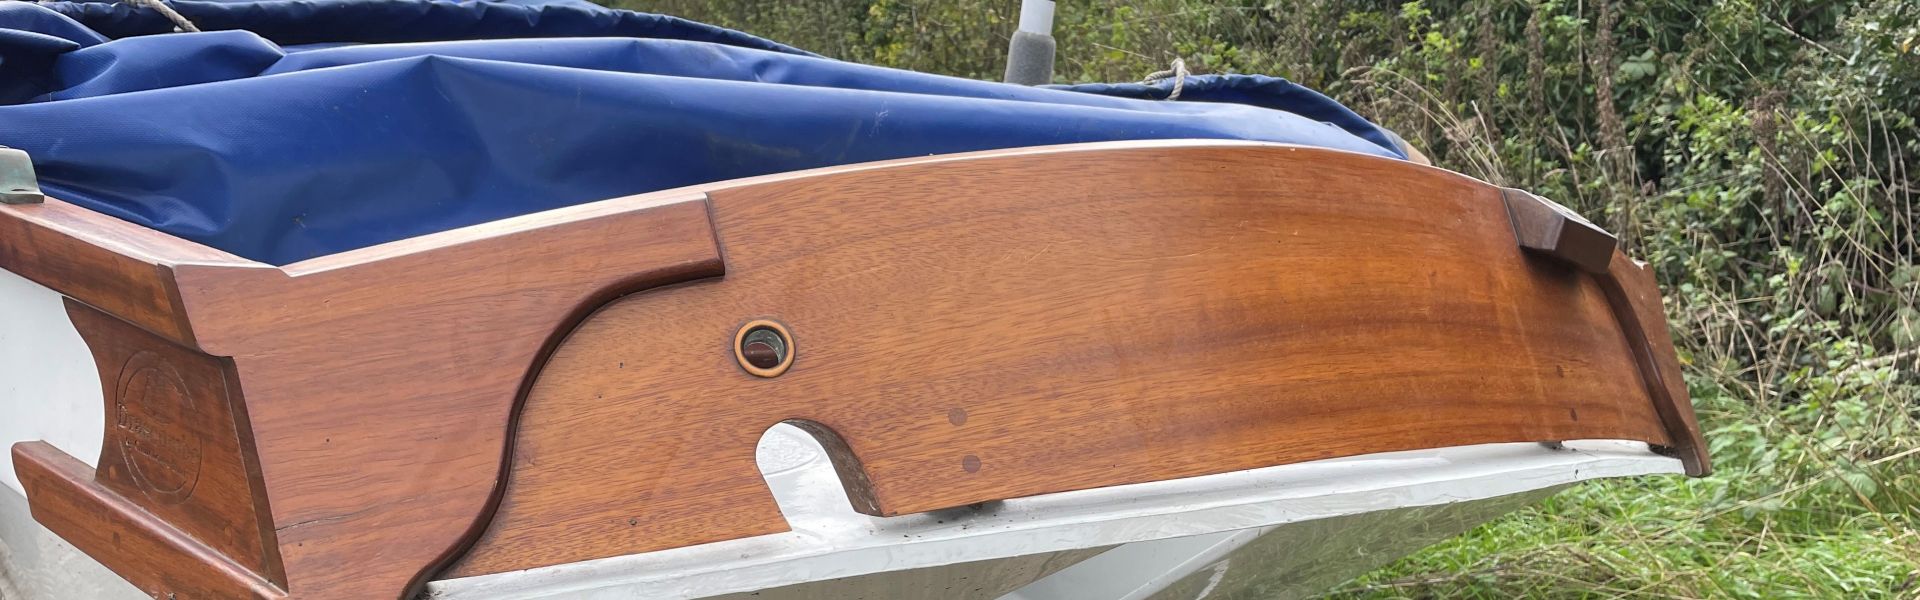 Drascombe Lugger 071 Year 2010